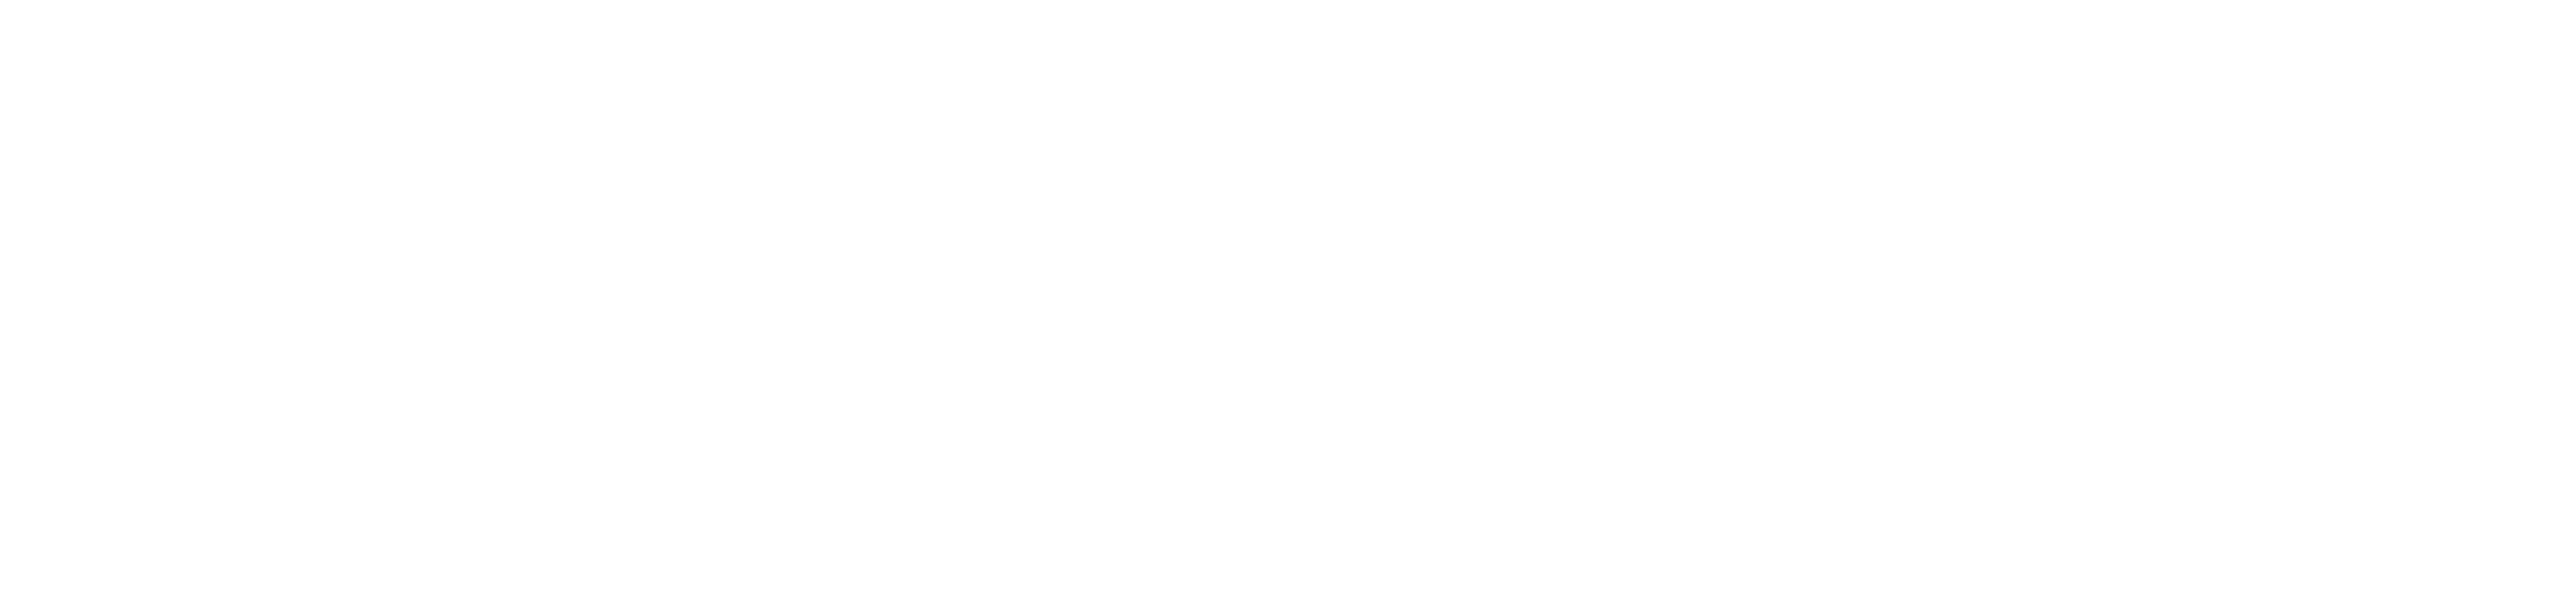 Ted Baker Logo - Ted Baker Mens Watches | Beaverbrooks